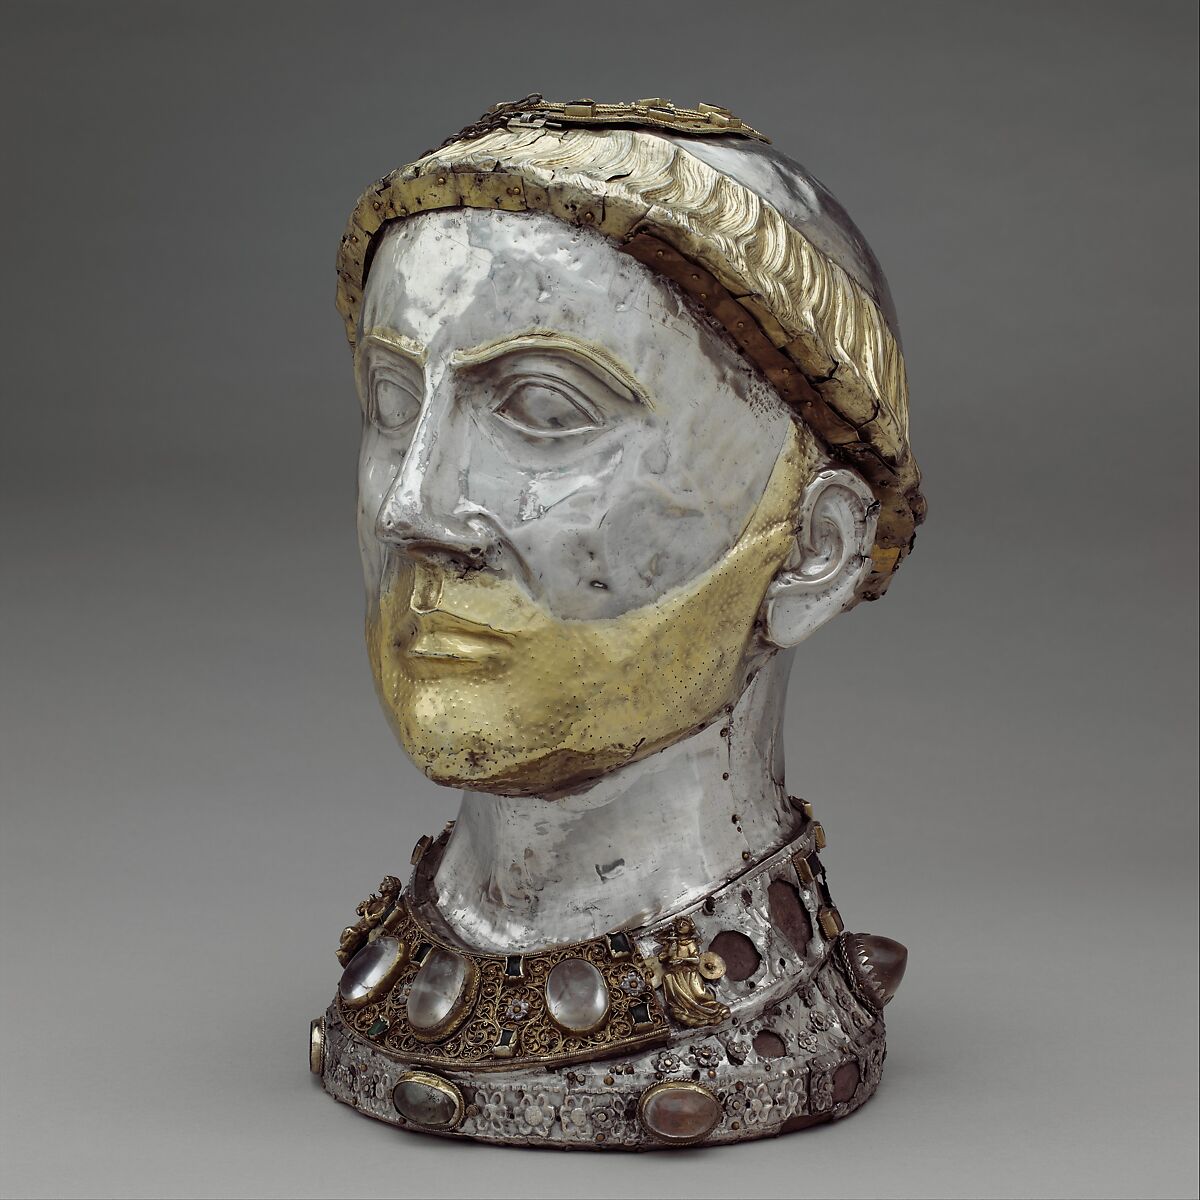 Reliquary Bust of Saint Yrieix, Silver and gilded silver with rock crystal, gems, and glass, French 